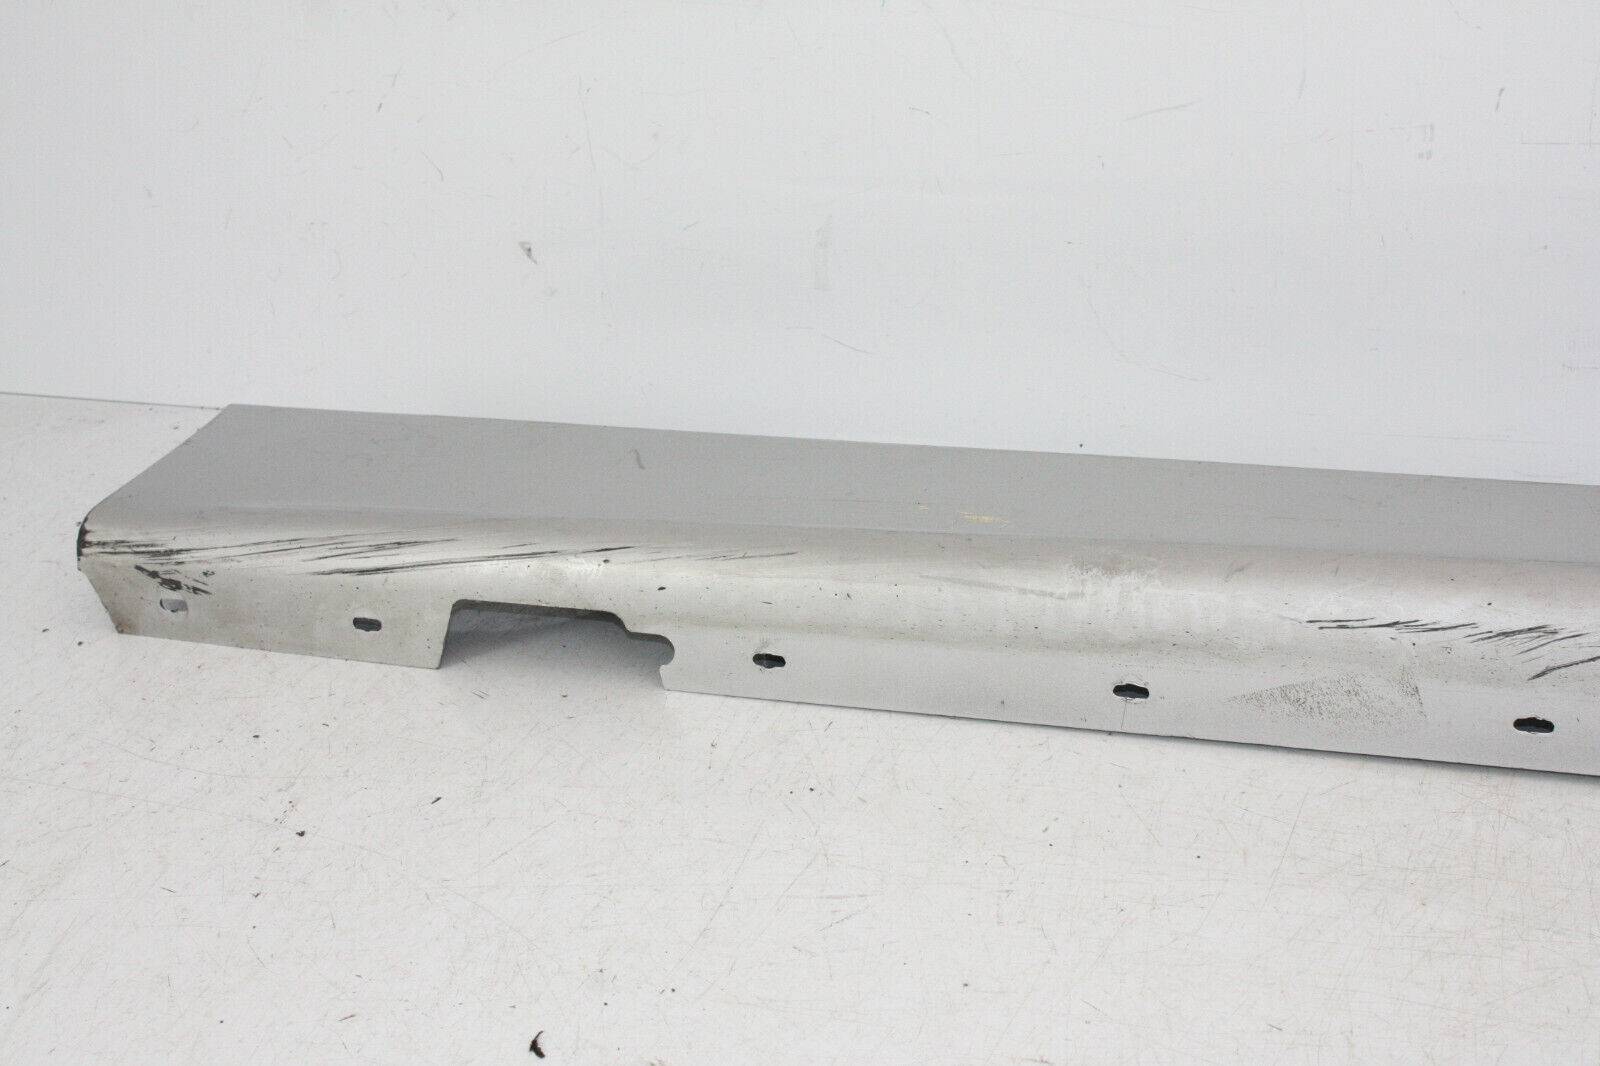 BMW-1-SERIES-E87-RIGHT-SIDE-SKIRT-2004-TO-2007-175367544522-9